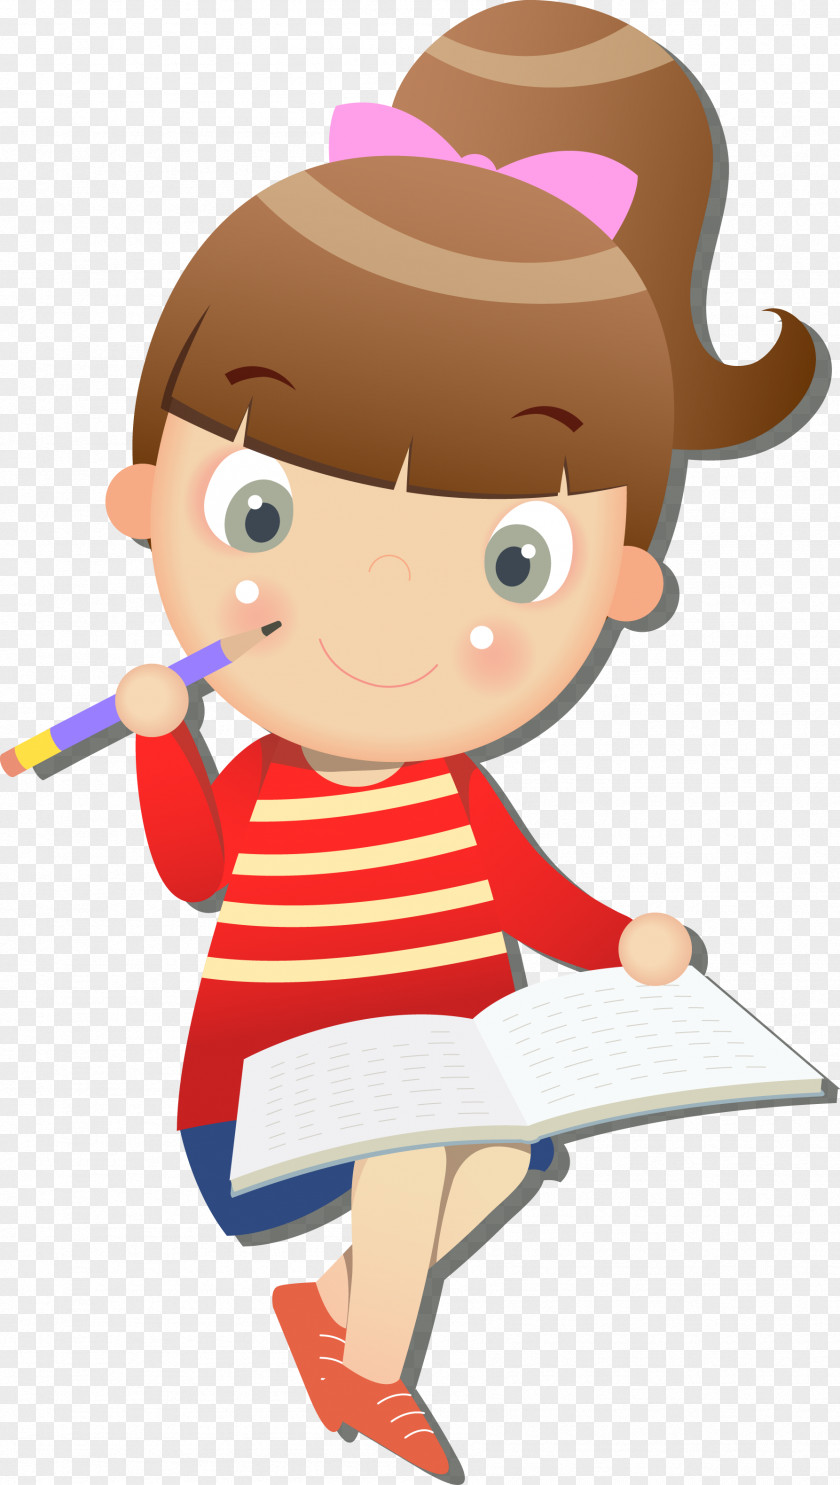 Cartoon Network Girl PNG Girl, Studying the girl, girl holding book and pencil clipart PNG